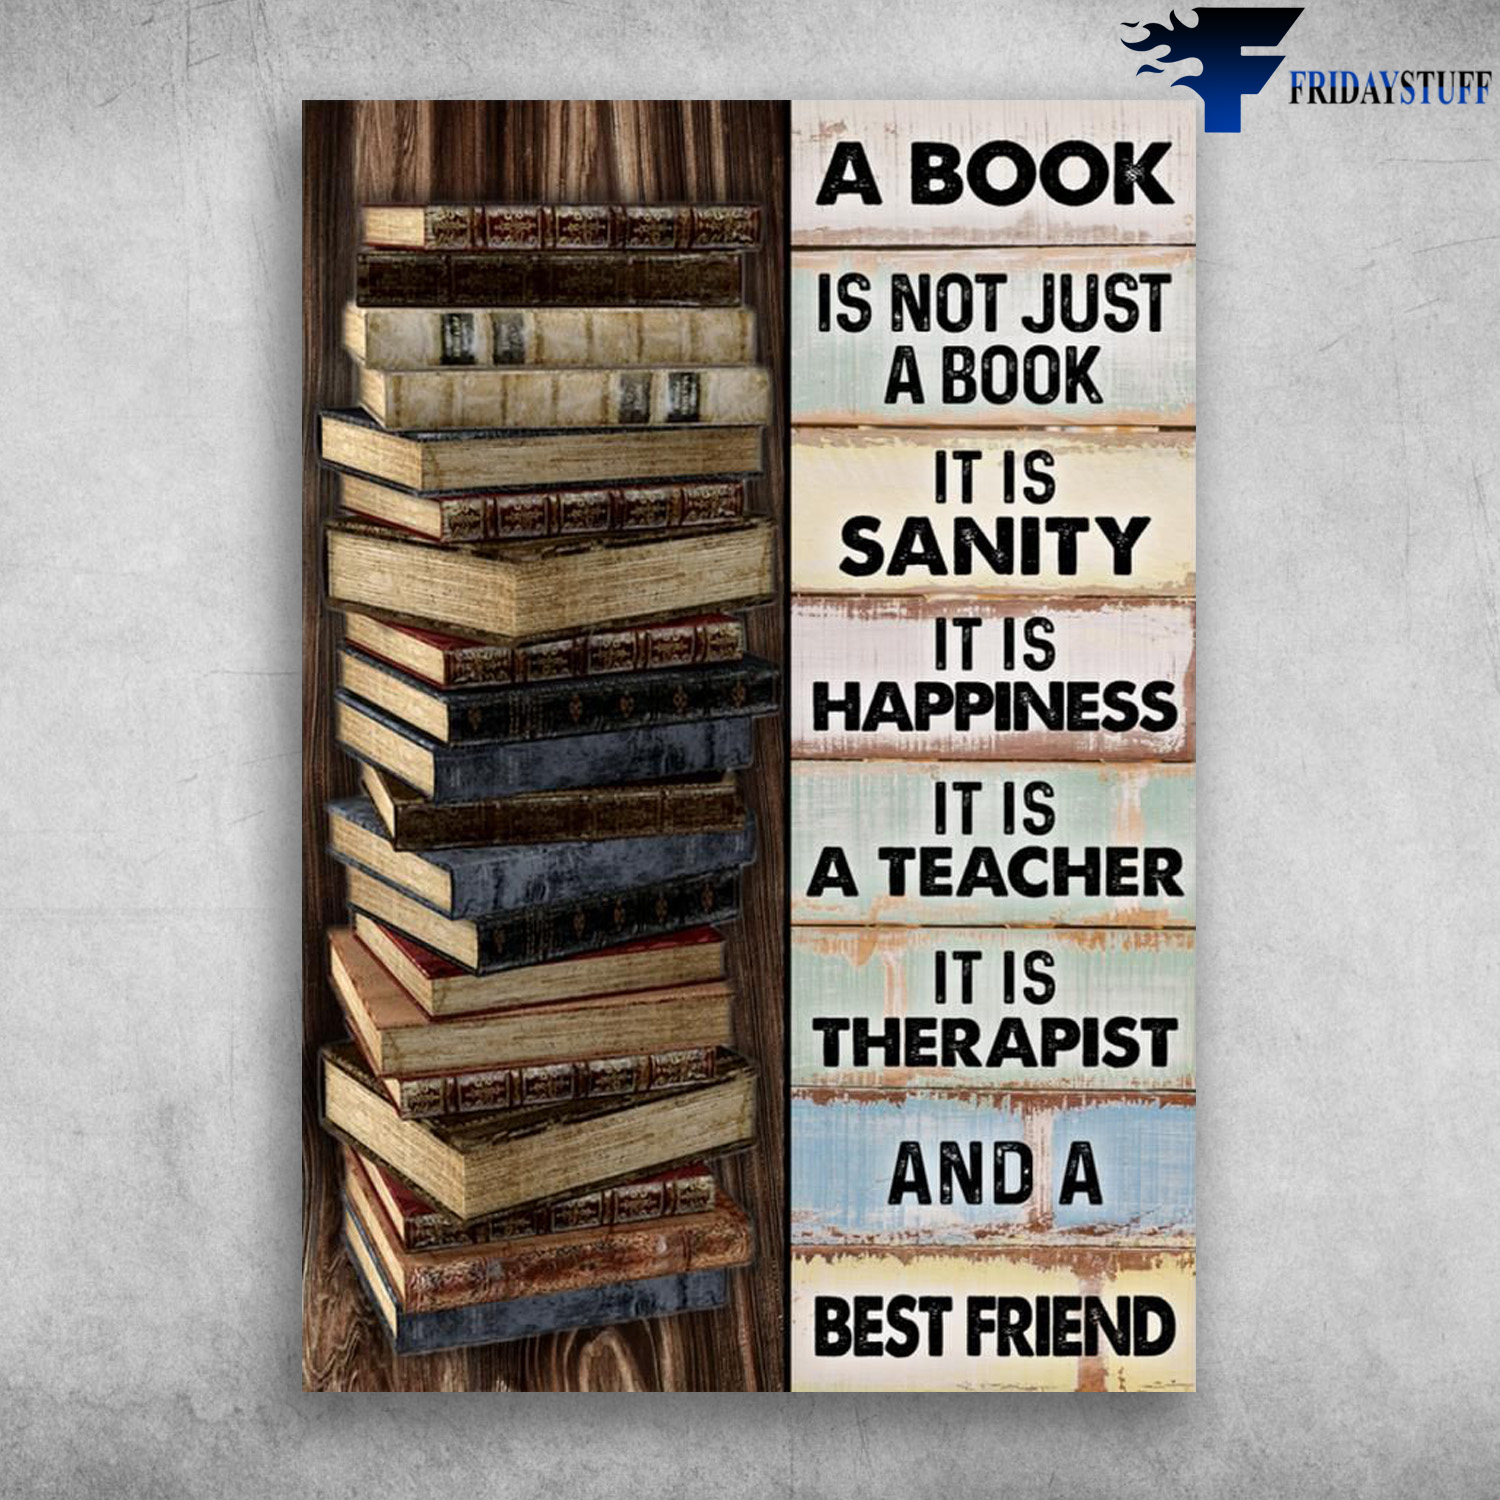 Book Is Friend, Book Lover - A Book Is Not Just A Book, It Is Sanity, It Is Happiness, It Os A Teacher, It Is Therapist, And A Best Friend